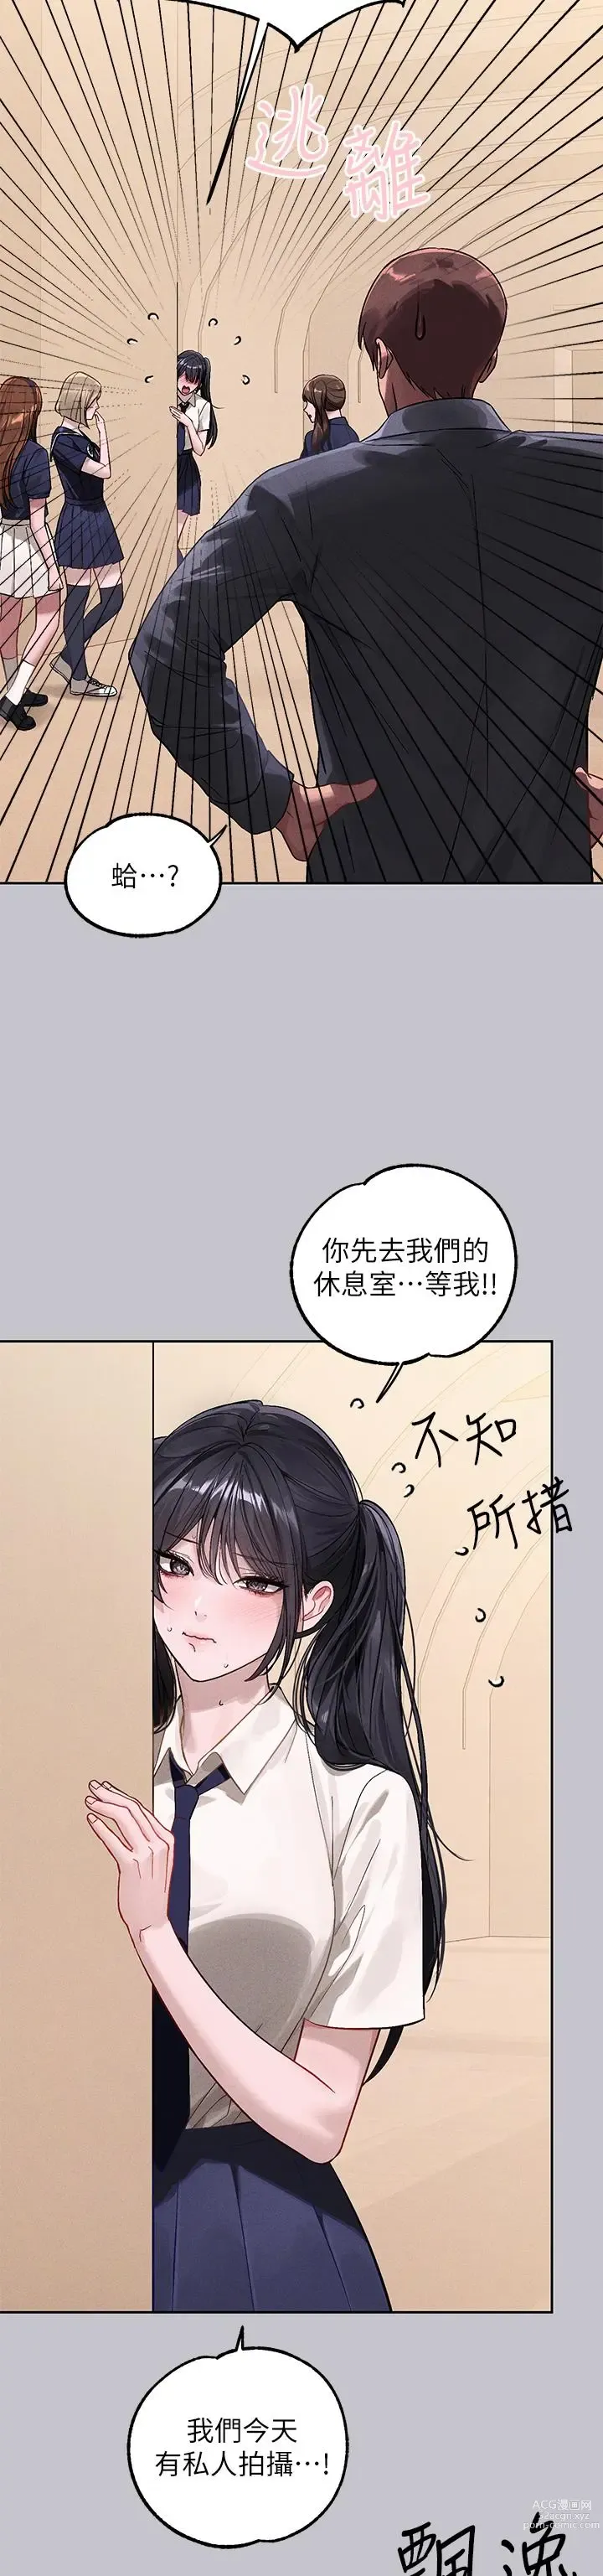 Page 8 of manga 富家女姐姐/ The Owner Of A Building 96-132